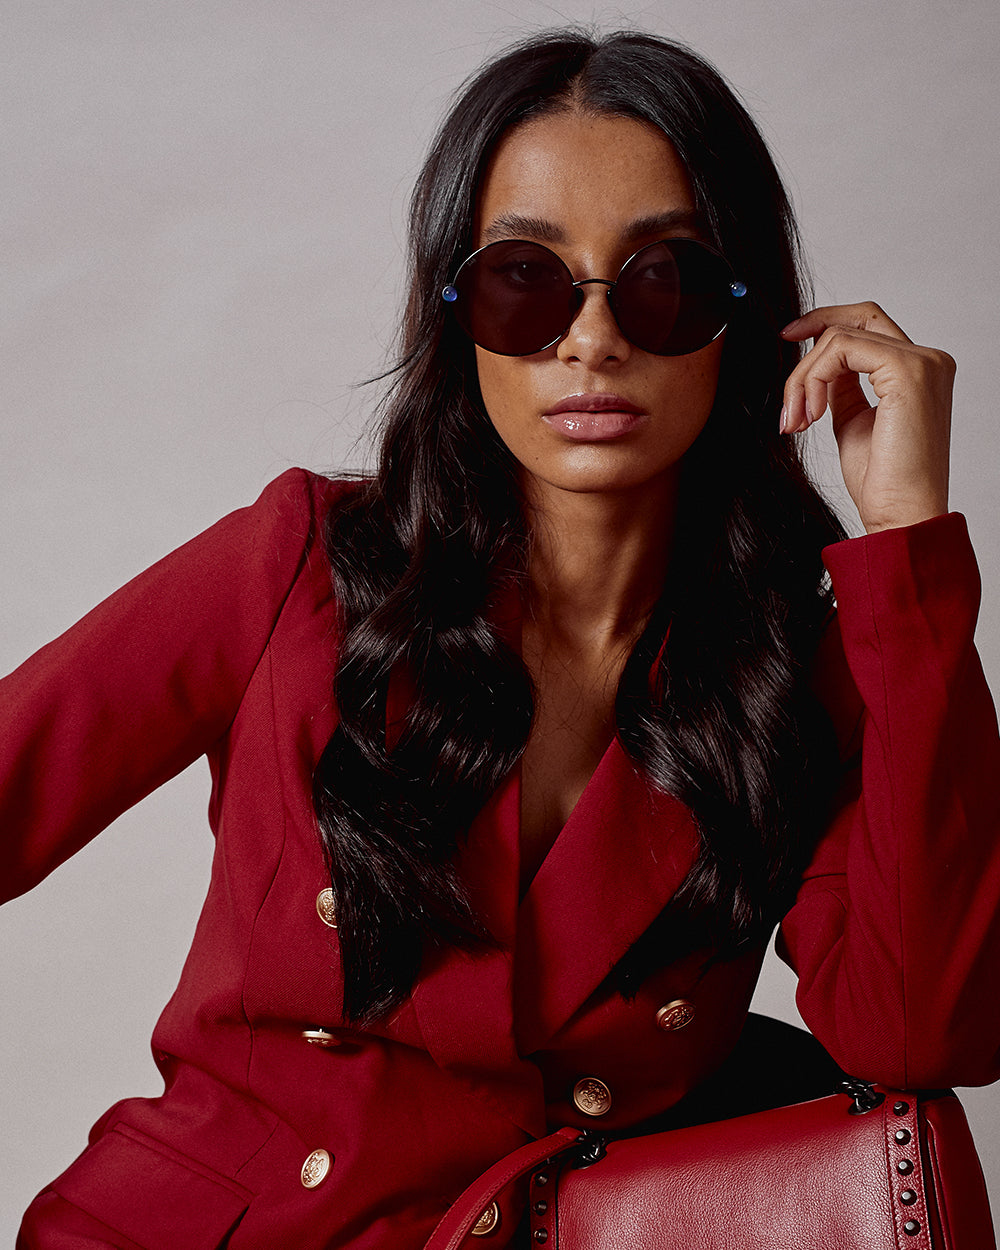 A person with long dark hair wearing round For Art&#39;s Sake® Love Story shades and a red blazer with gold buttons poses confidently against a neutral background. They have a serious expression, and their sunglasses feature jadestone nose pads for extra comfort while offering 100% UV protection. One hand is resting near their temple.